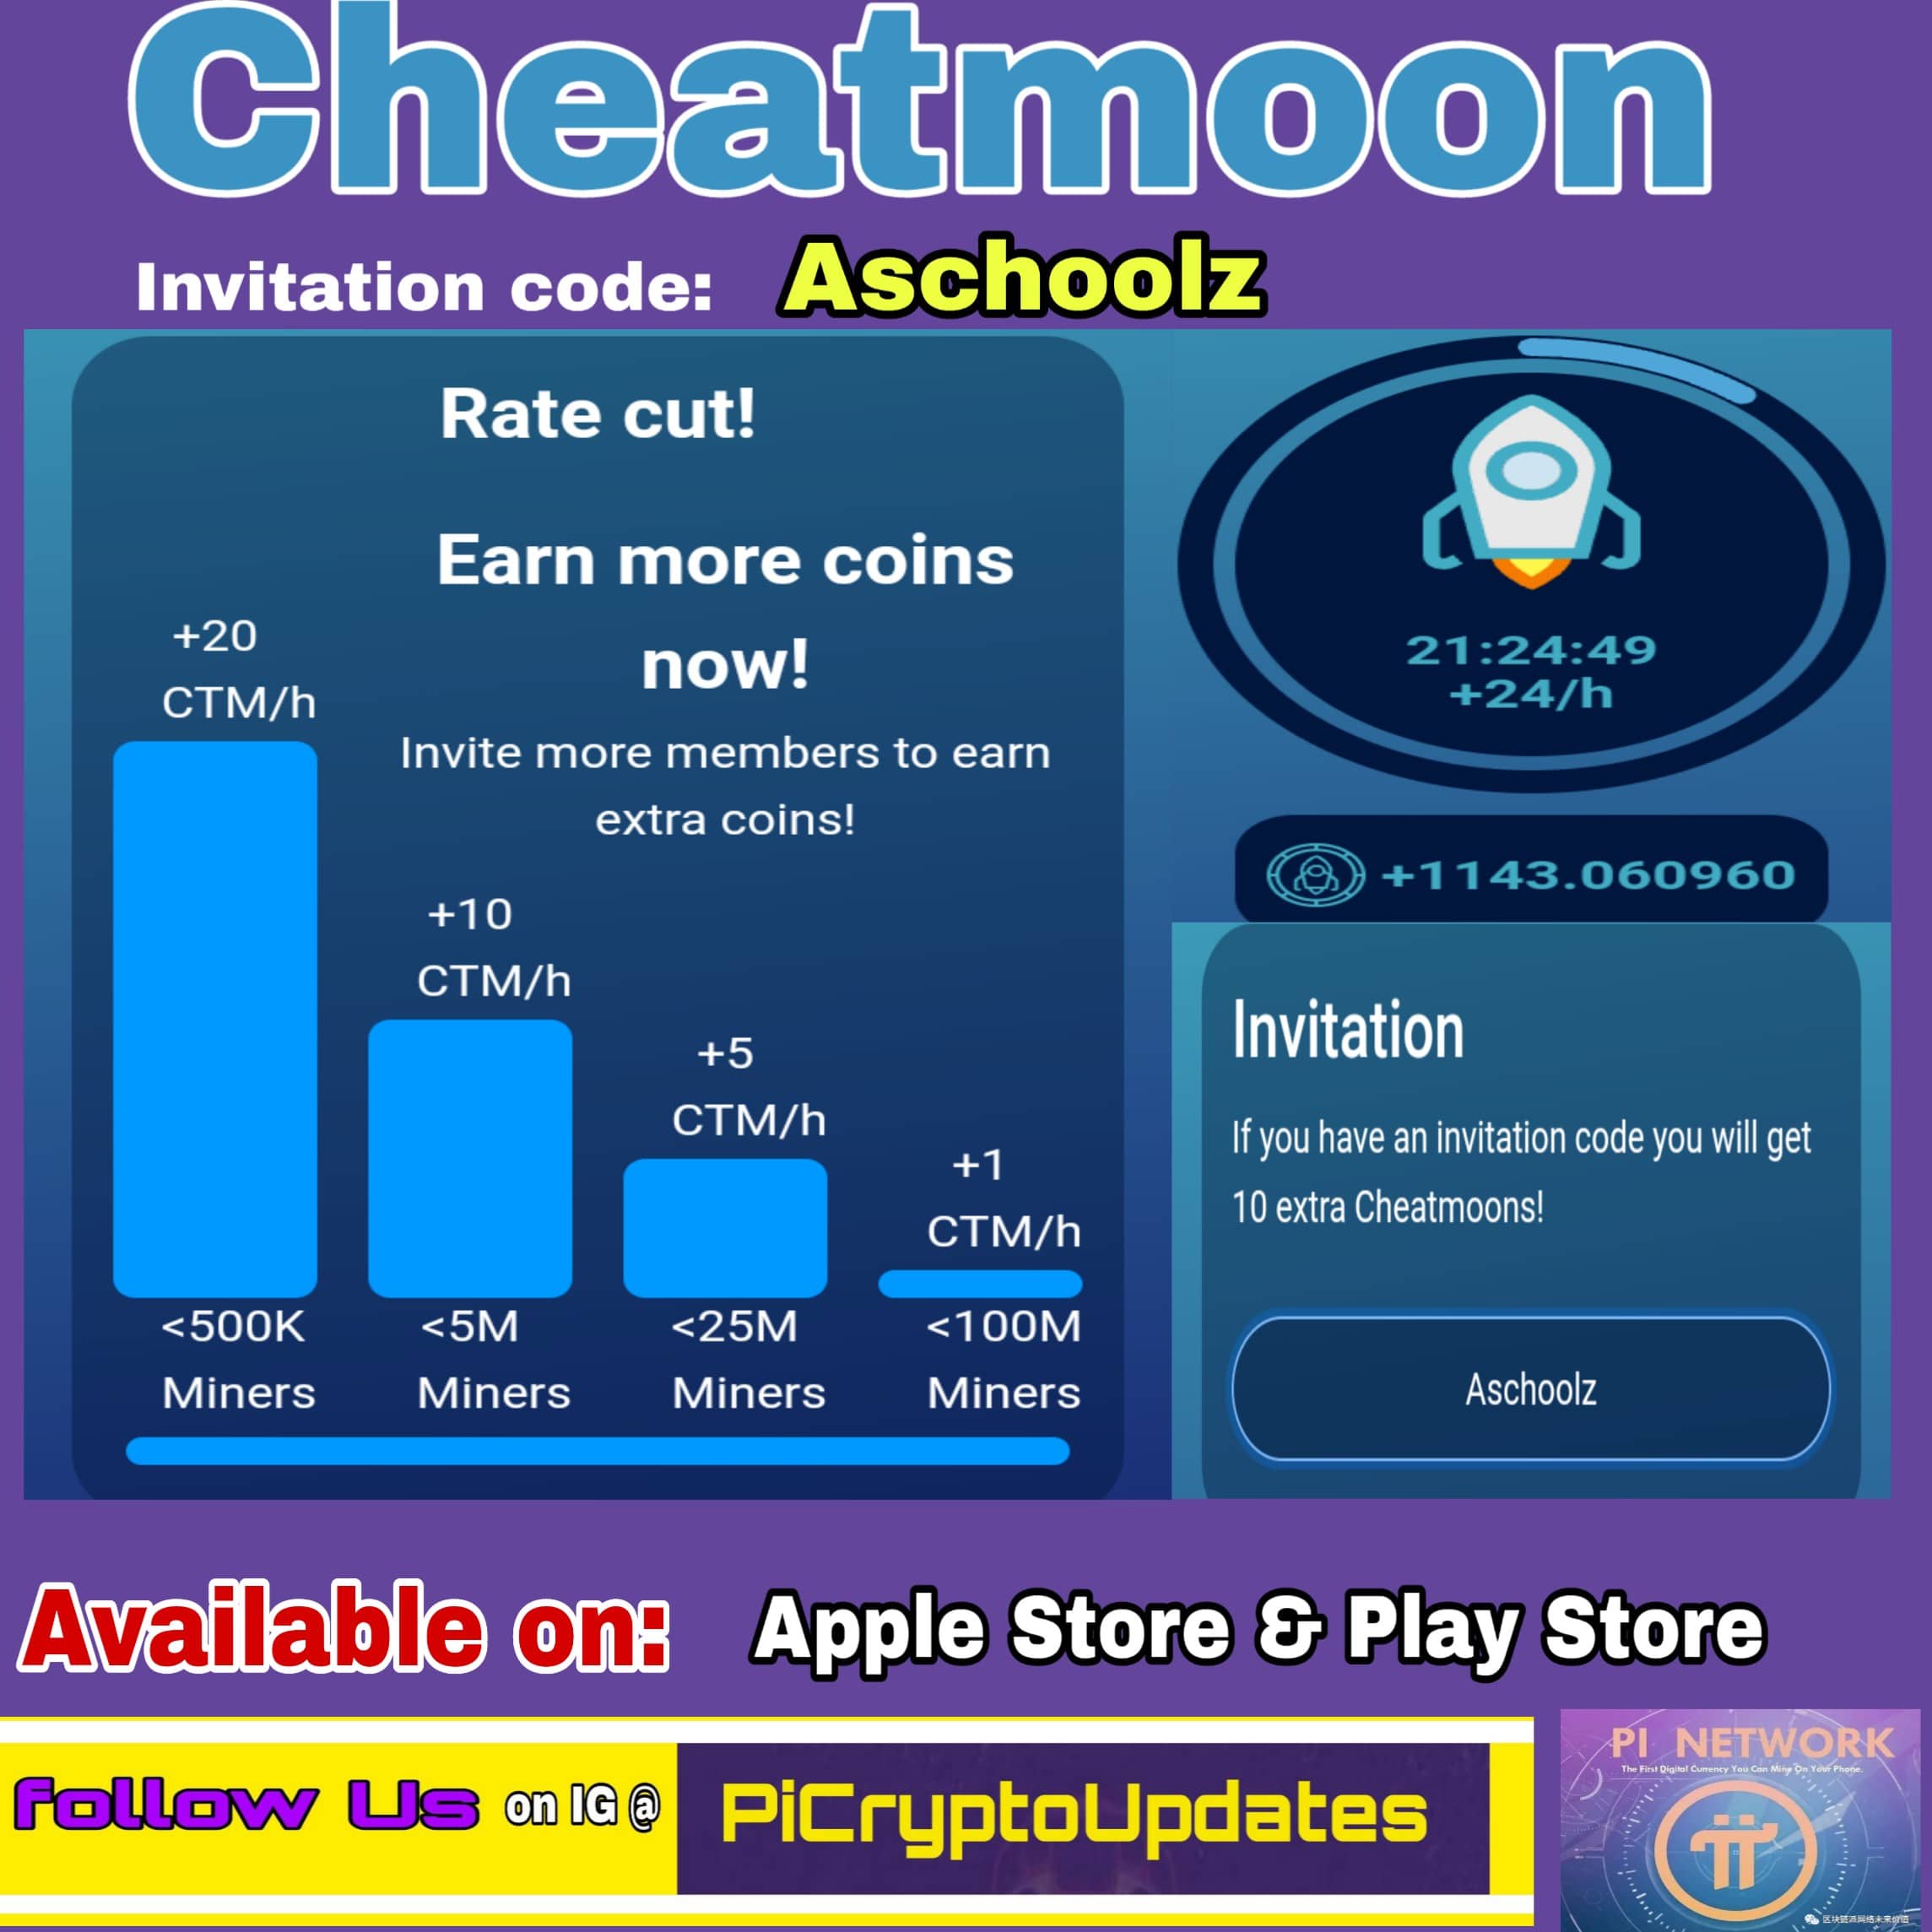 Cheatmoon Network Sign Up, Sign In Login | How to Create Cheatmoon Network Account